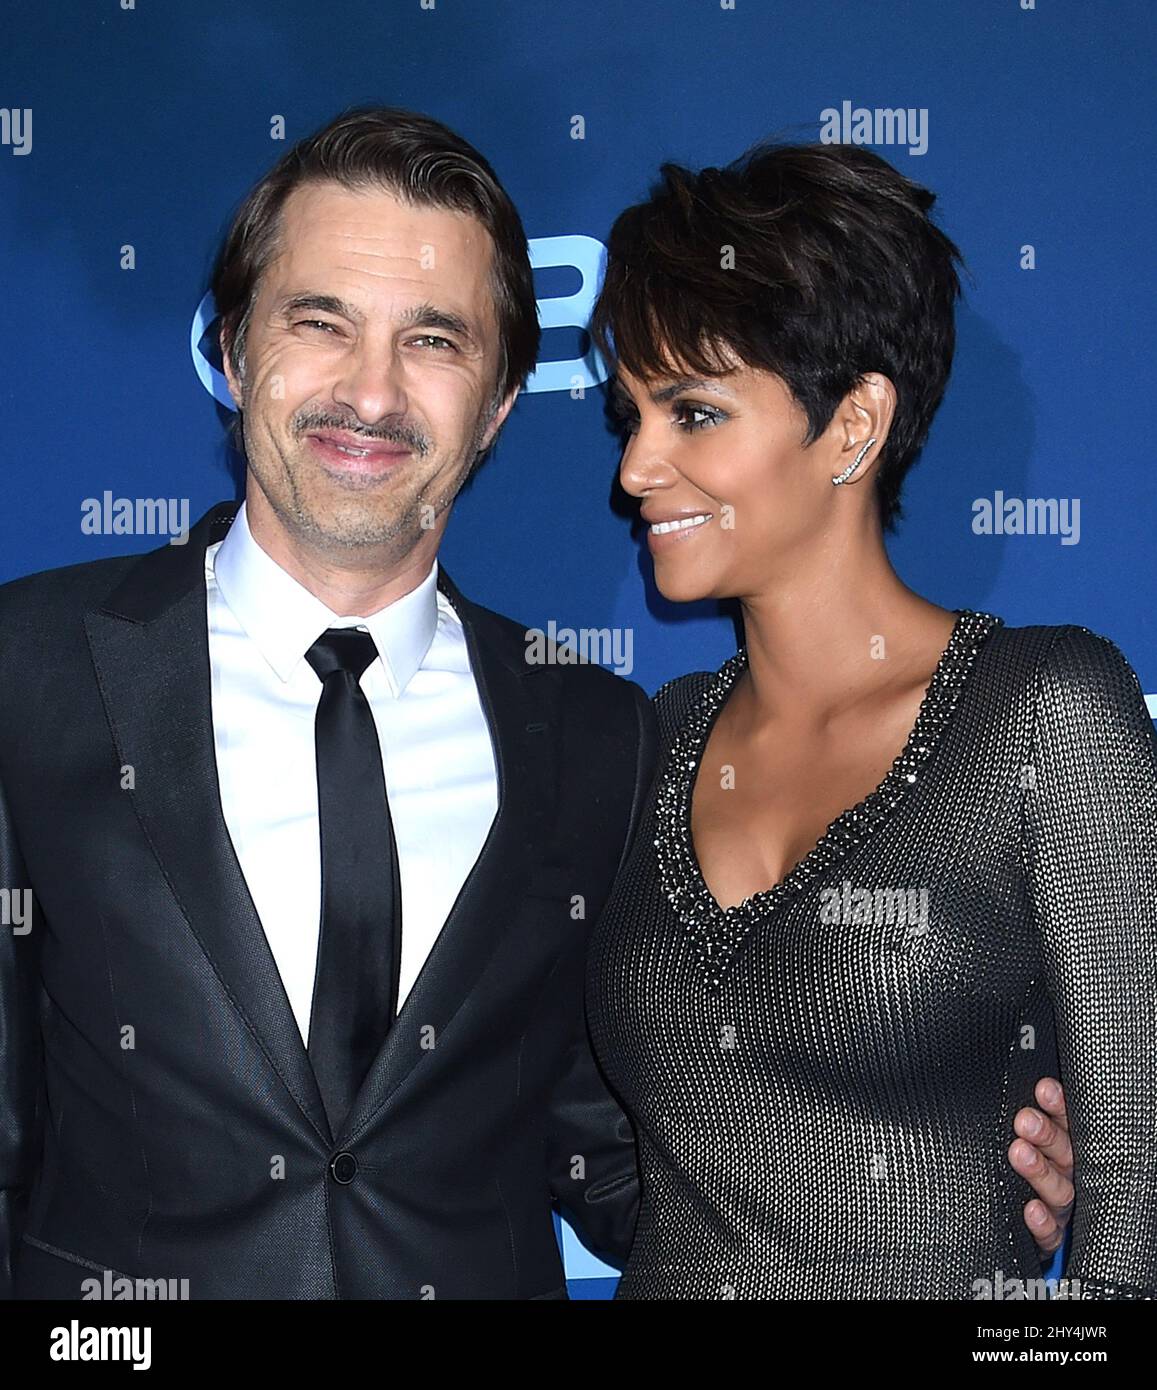 Olivier Martinez and Halle Berry attending the premiere of 'Extant' in Los Angeles, California. Stock Photo